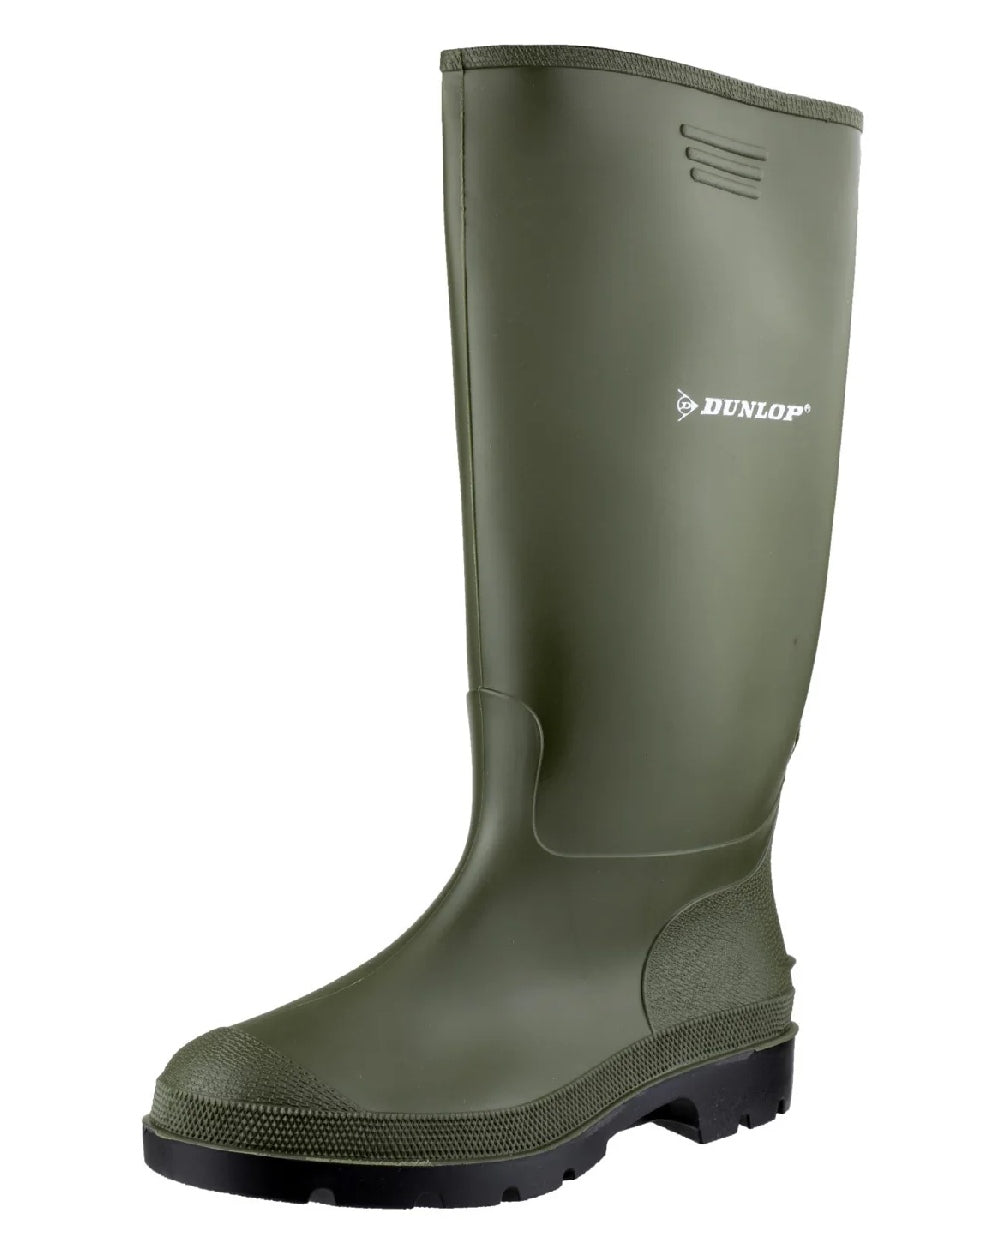 Green coloured Dunlop Pricemastor Wellingtons on white background 